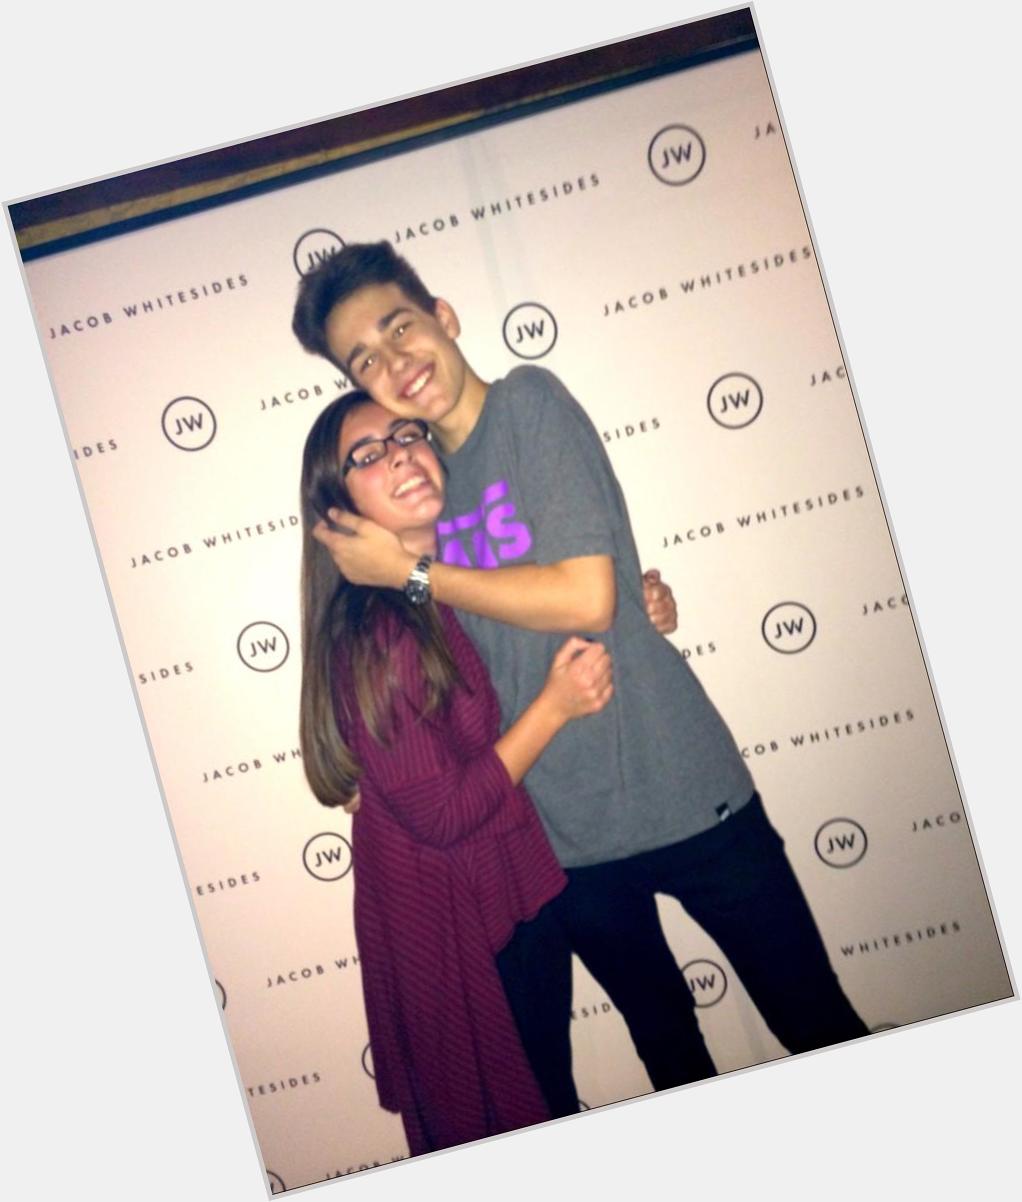 ONE FINAL HAPPY BIRTHDAY TO THE LOML JACOB WHITESIDES. MISS YOU LIKE CRAZY 